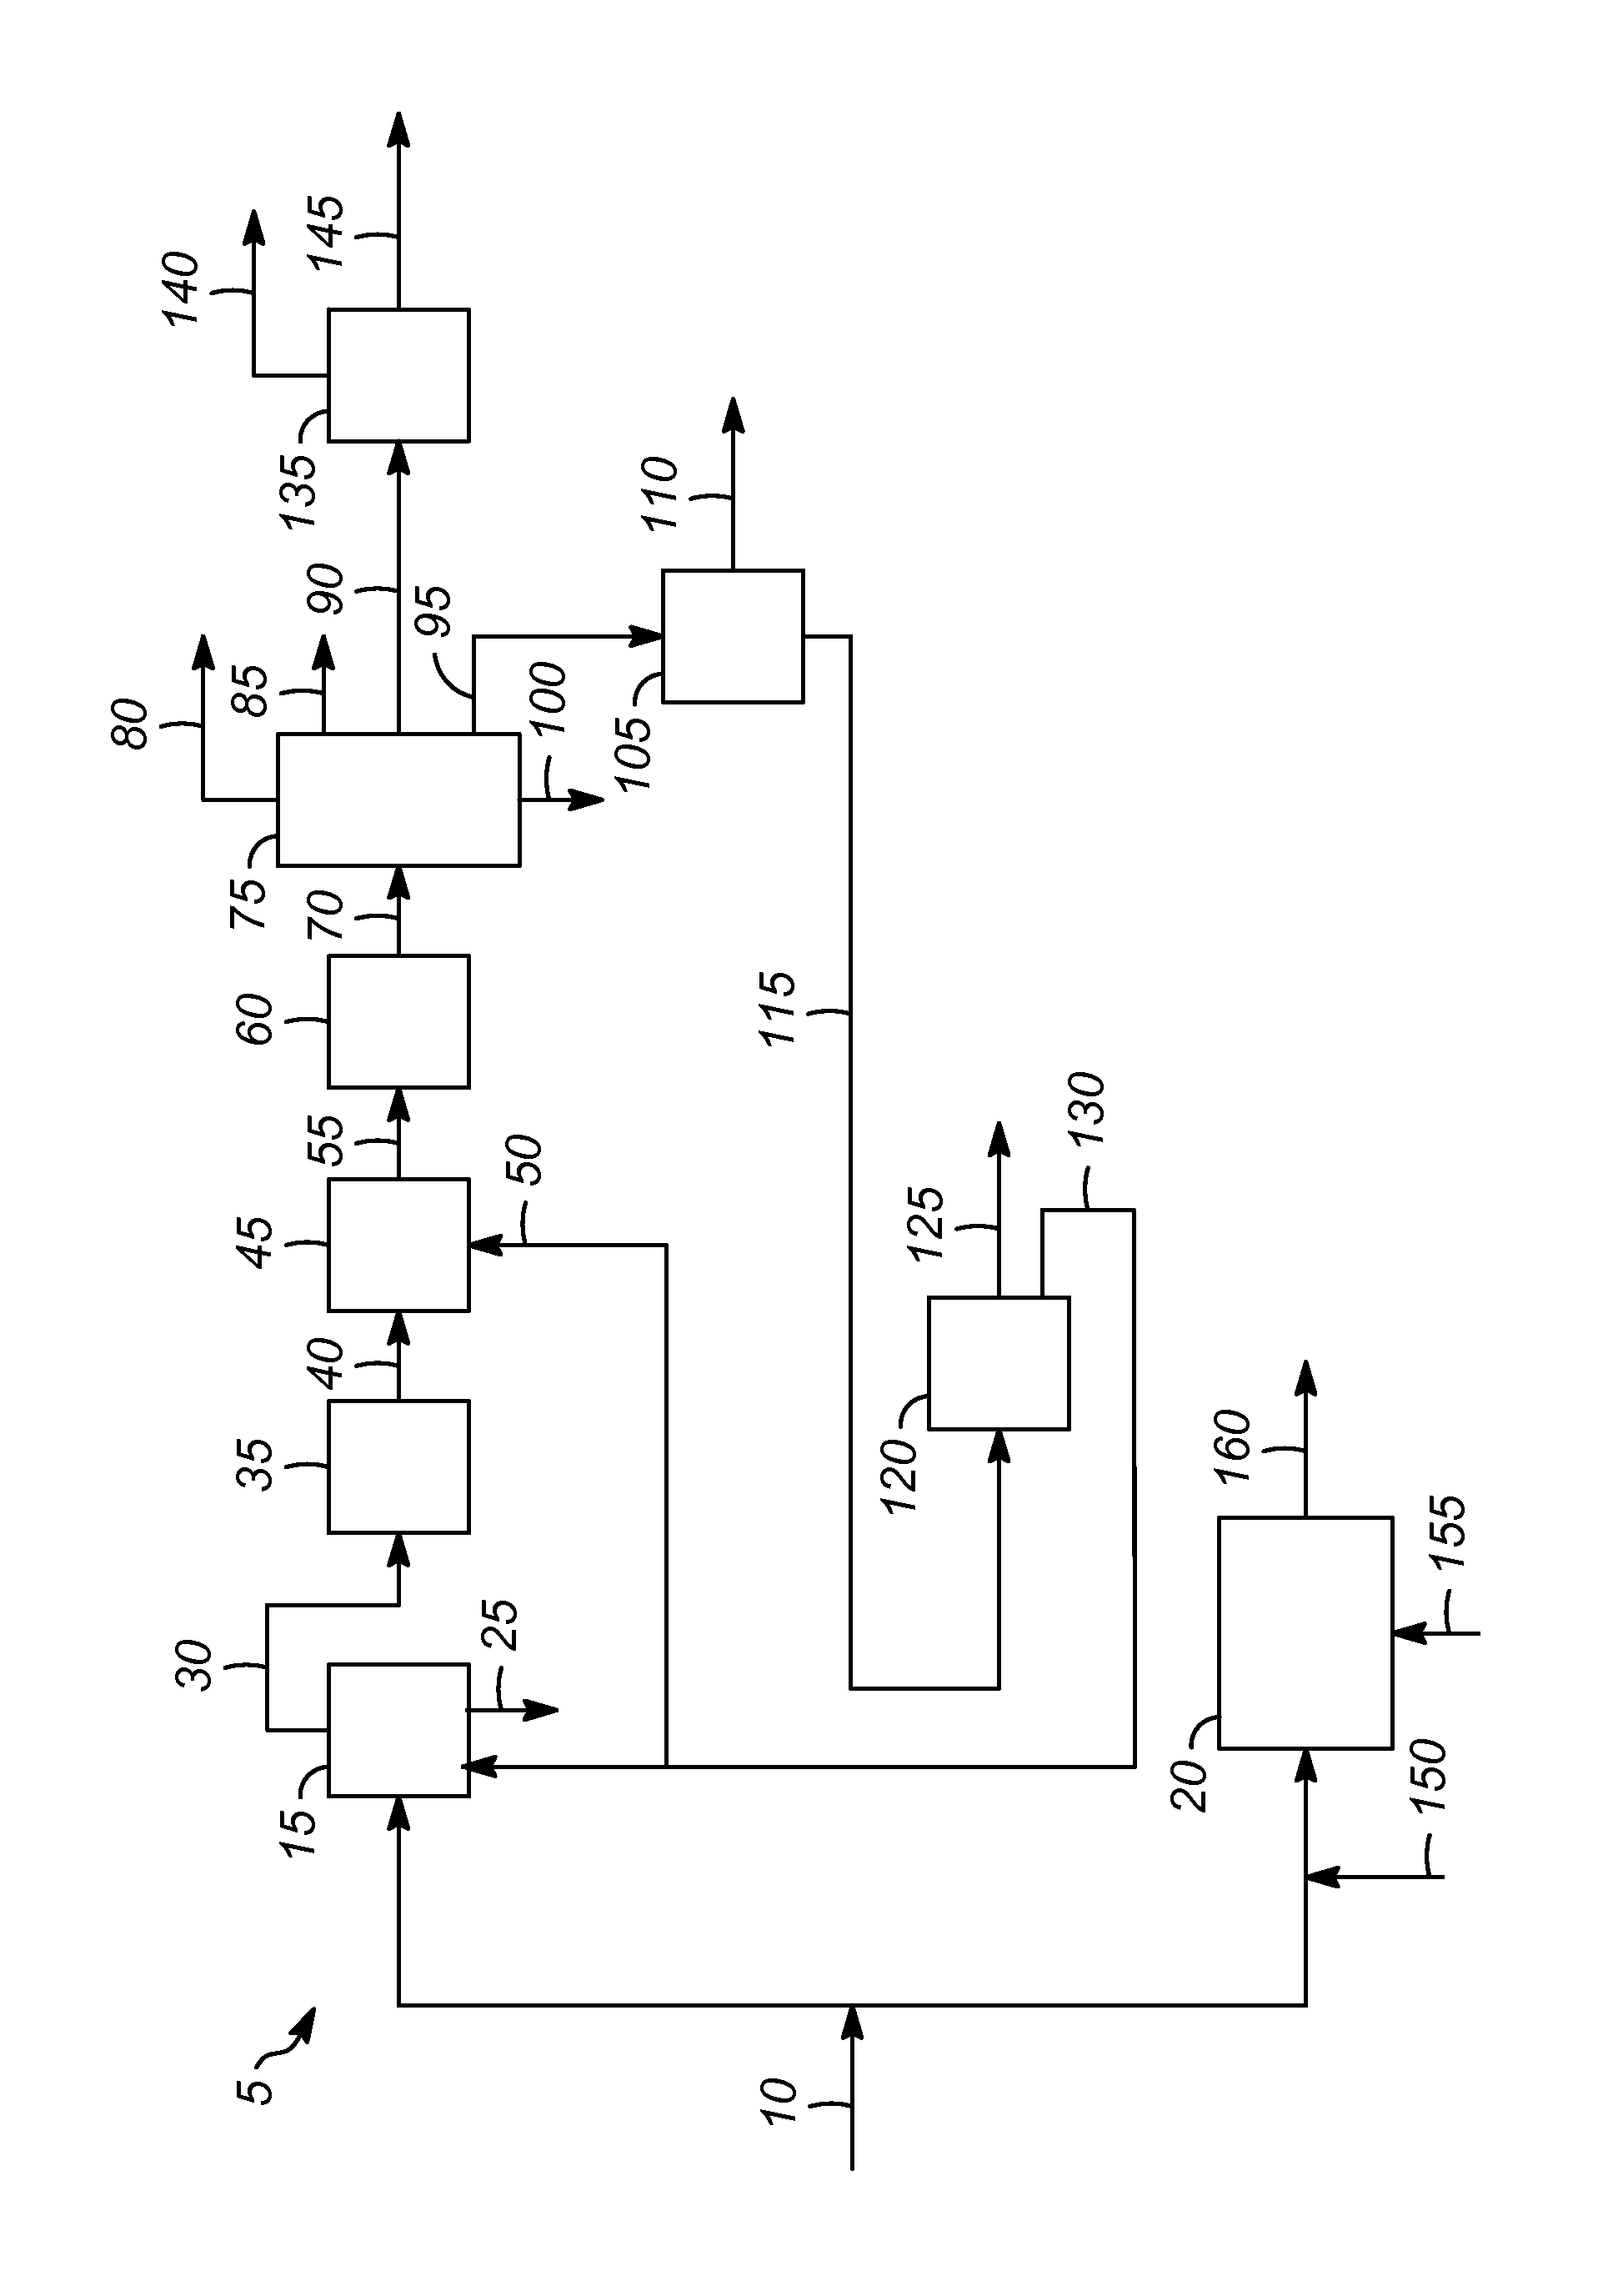 Process for converting polycyclic aromatic compounds to monocyclic aromatic compounds